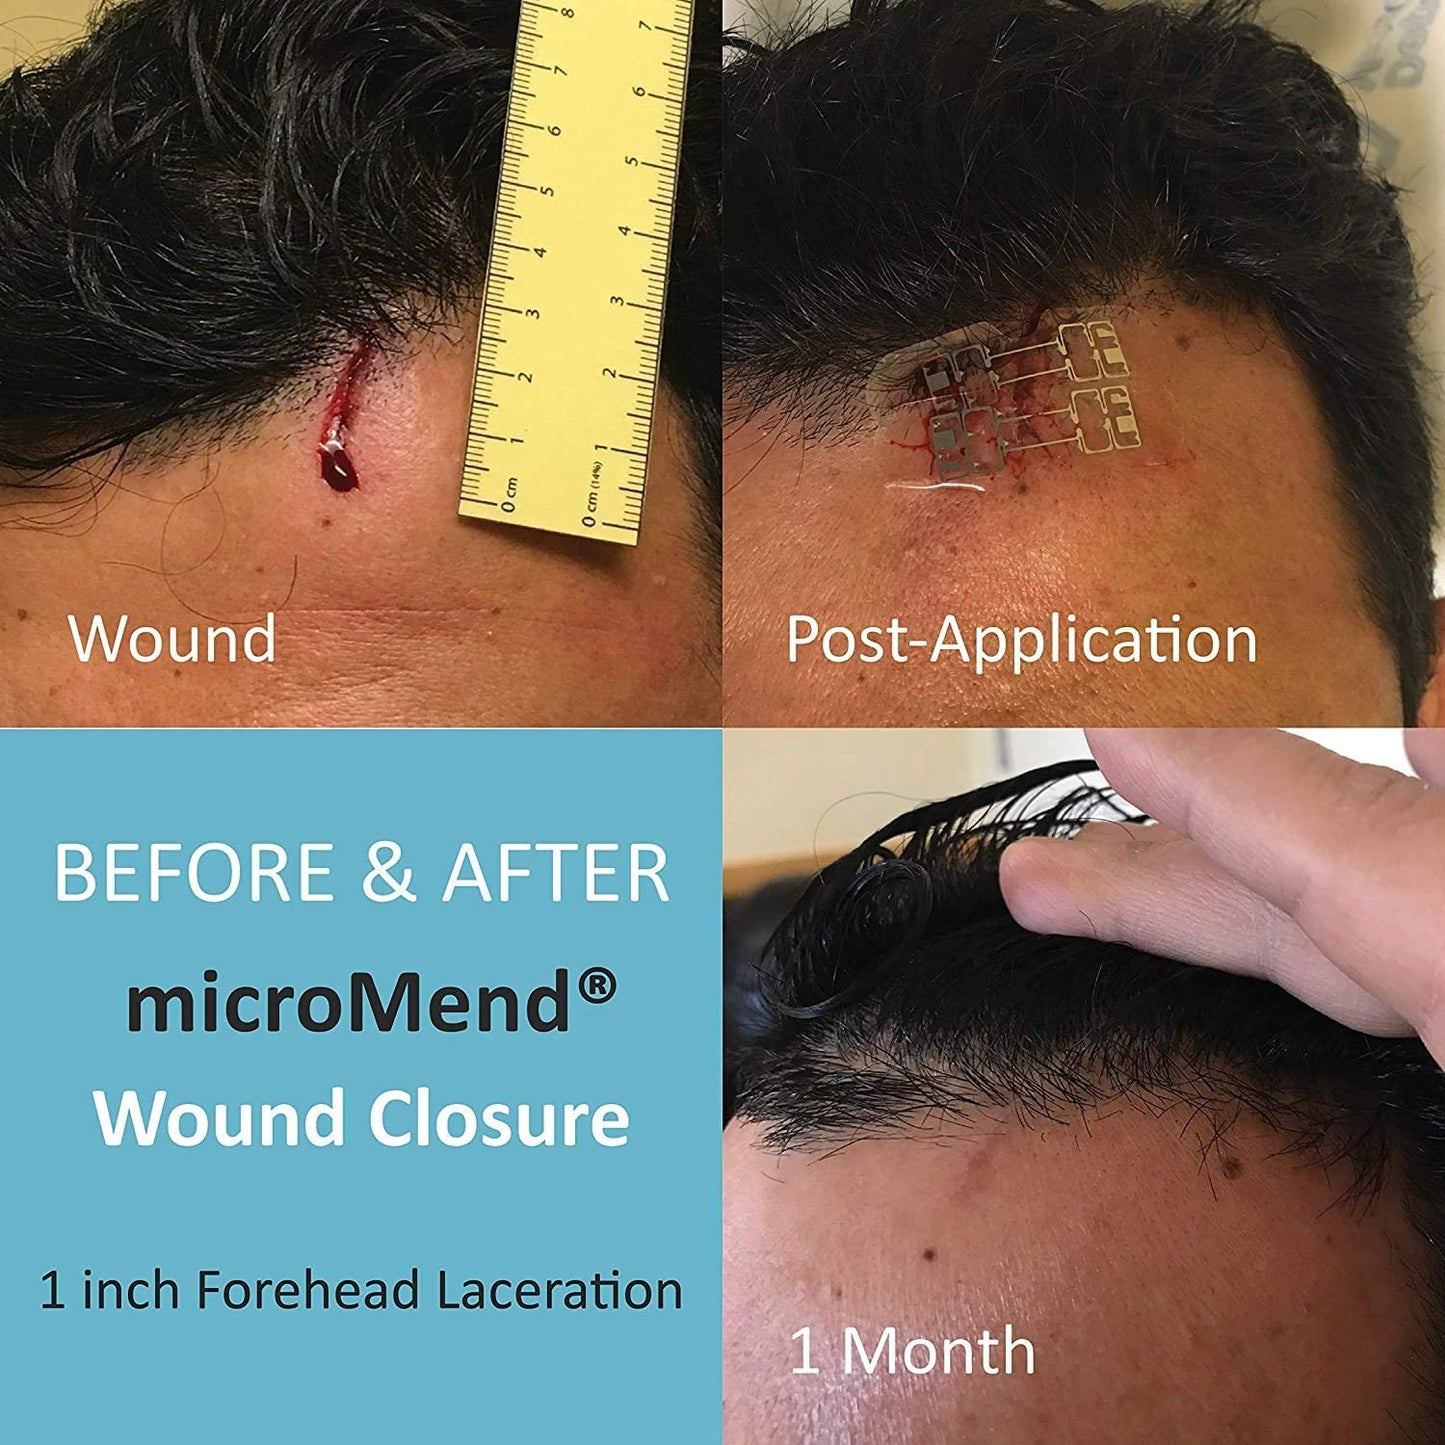 Emergency Wound Closures Surgical Quality Laceration Repair without Stitches - Think Ahead - Be Prepared - Add to Your Survival Kit, Camping Gear (Combo Pack - 2 Sizes: Small & Medium)